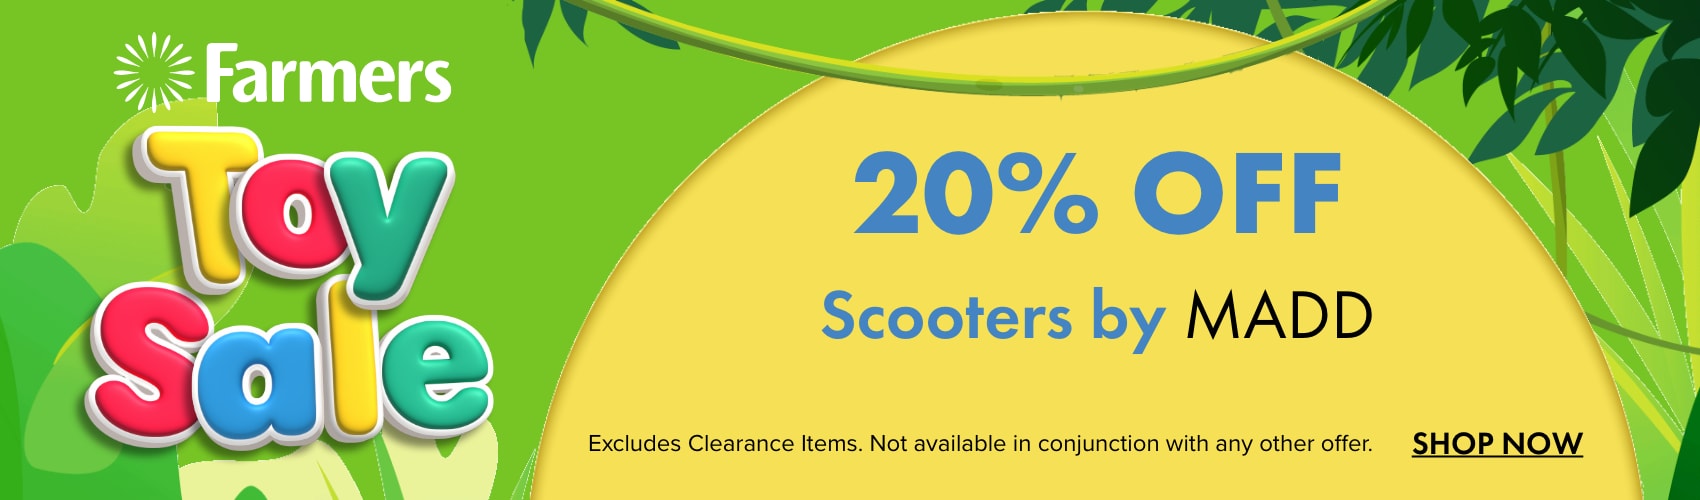 20% OFF Scooters by MADD